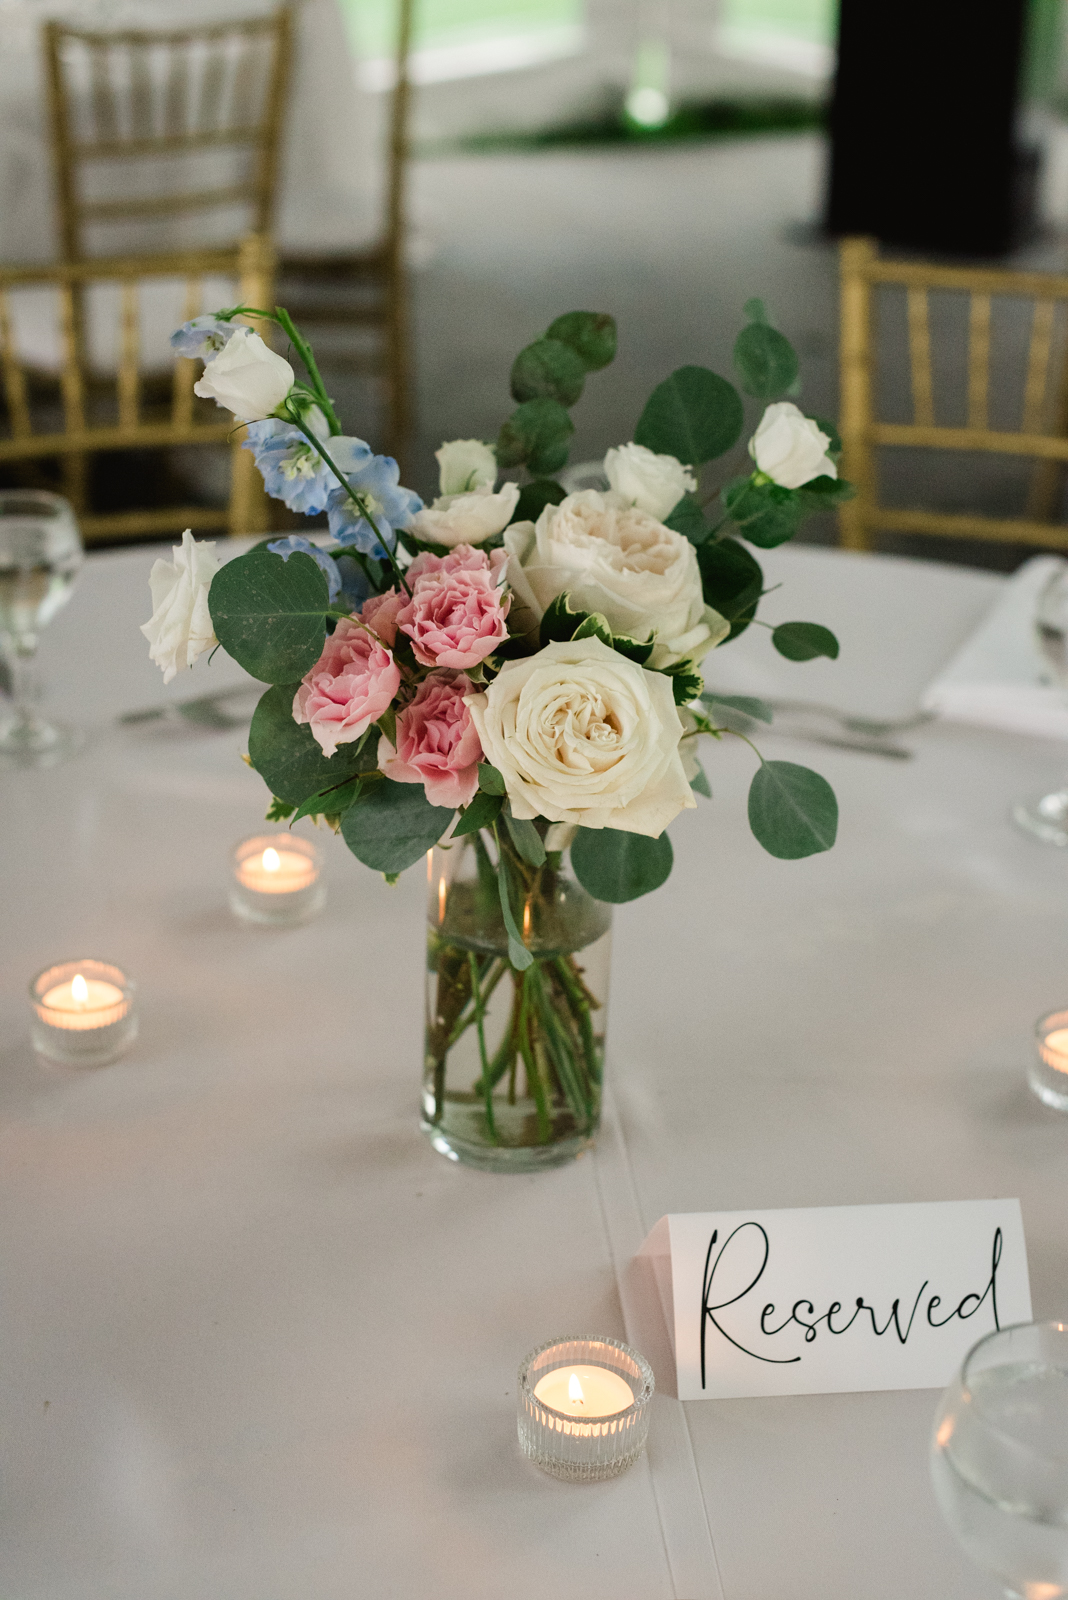 vase of flowers on table at wedding reception